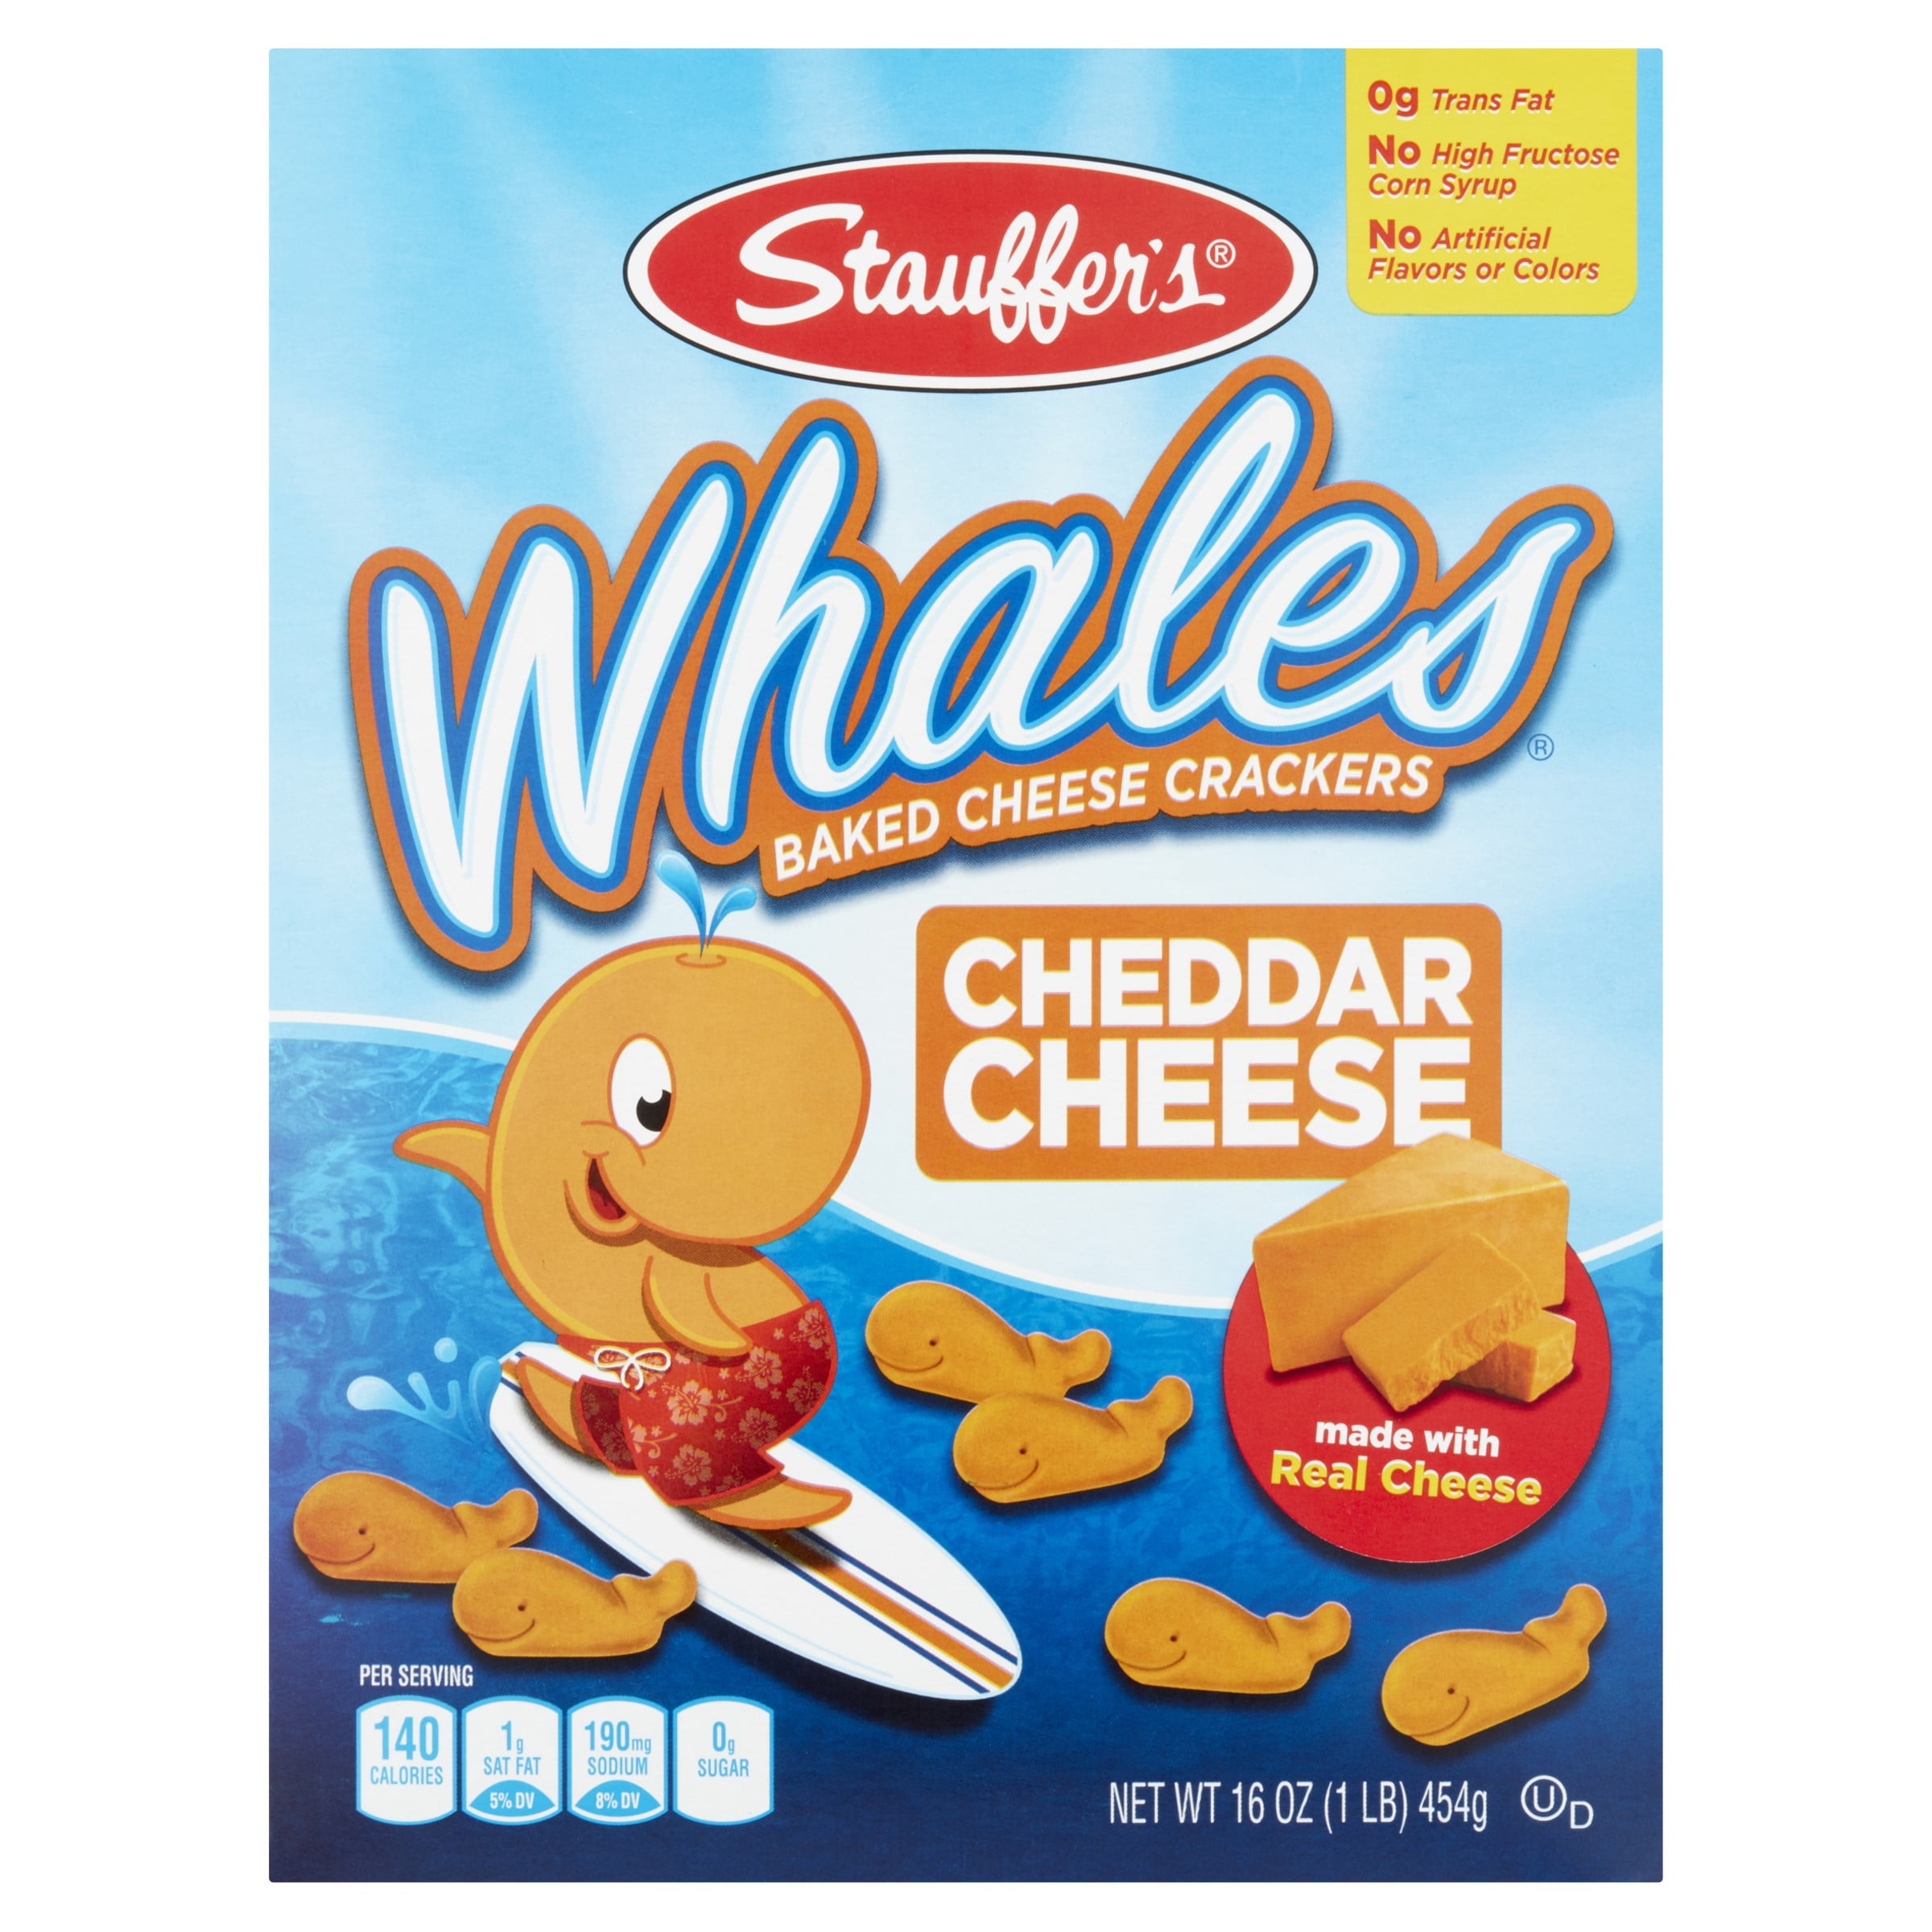 Is it Dairy Free Stauffer’s Whales Baked Cheddar Cheese Crackers